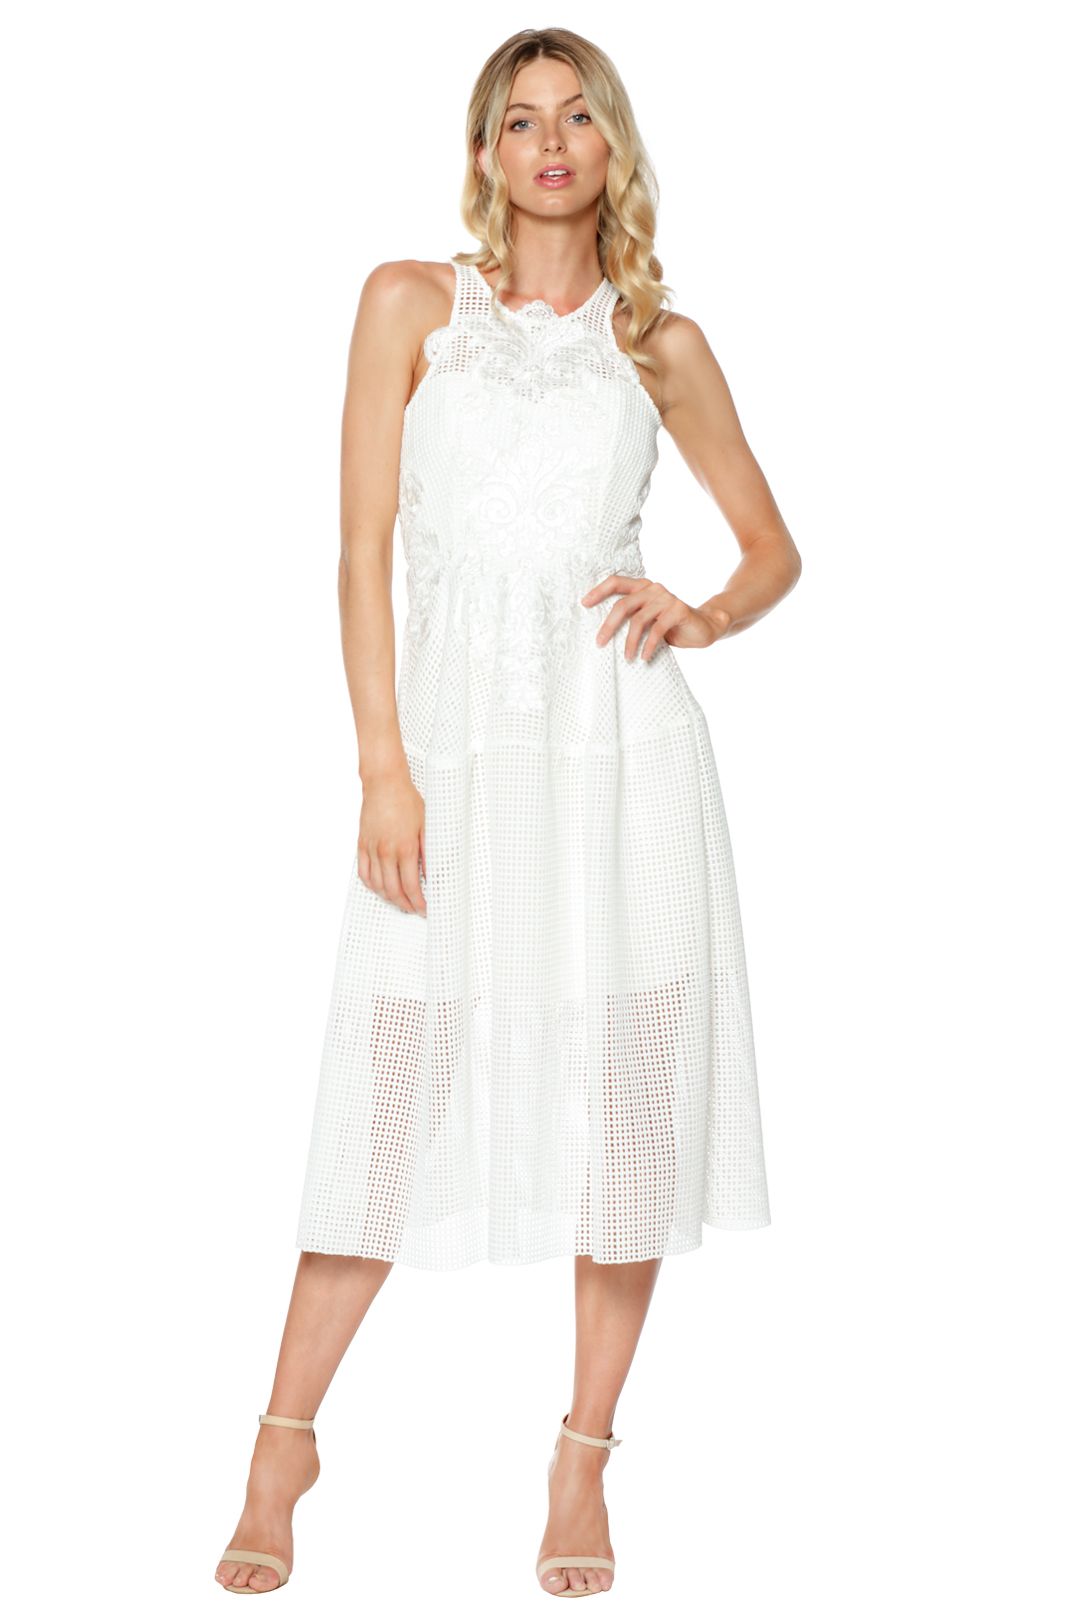 Thurley - Bianca Embroidered Dress - White - Front